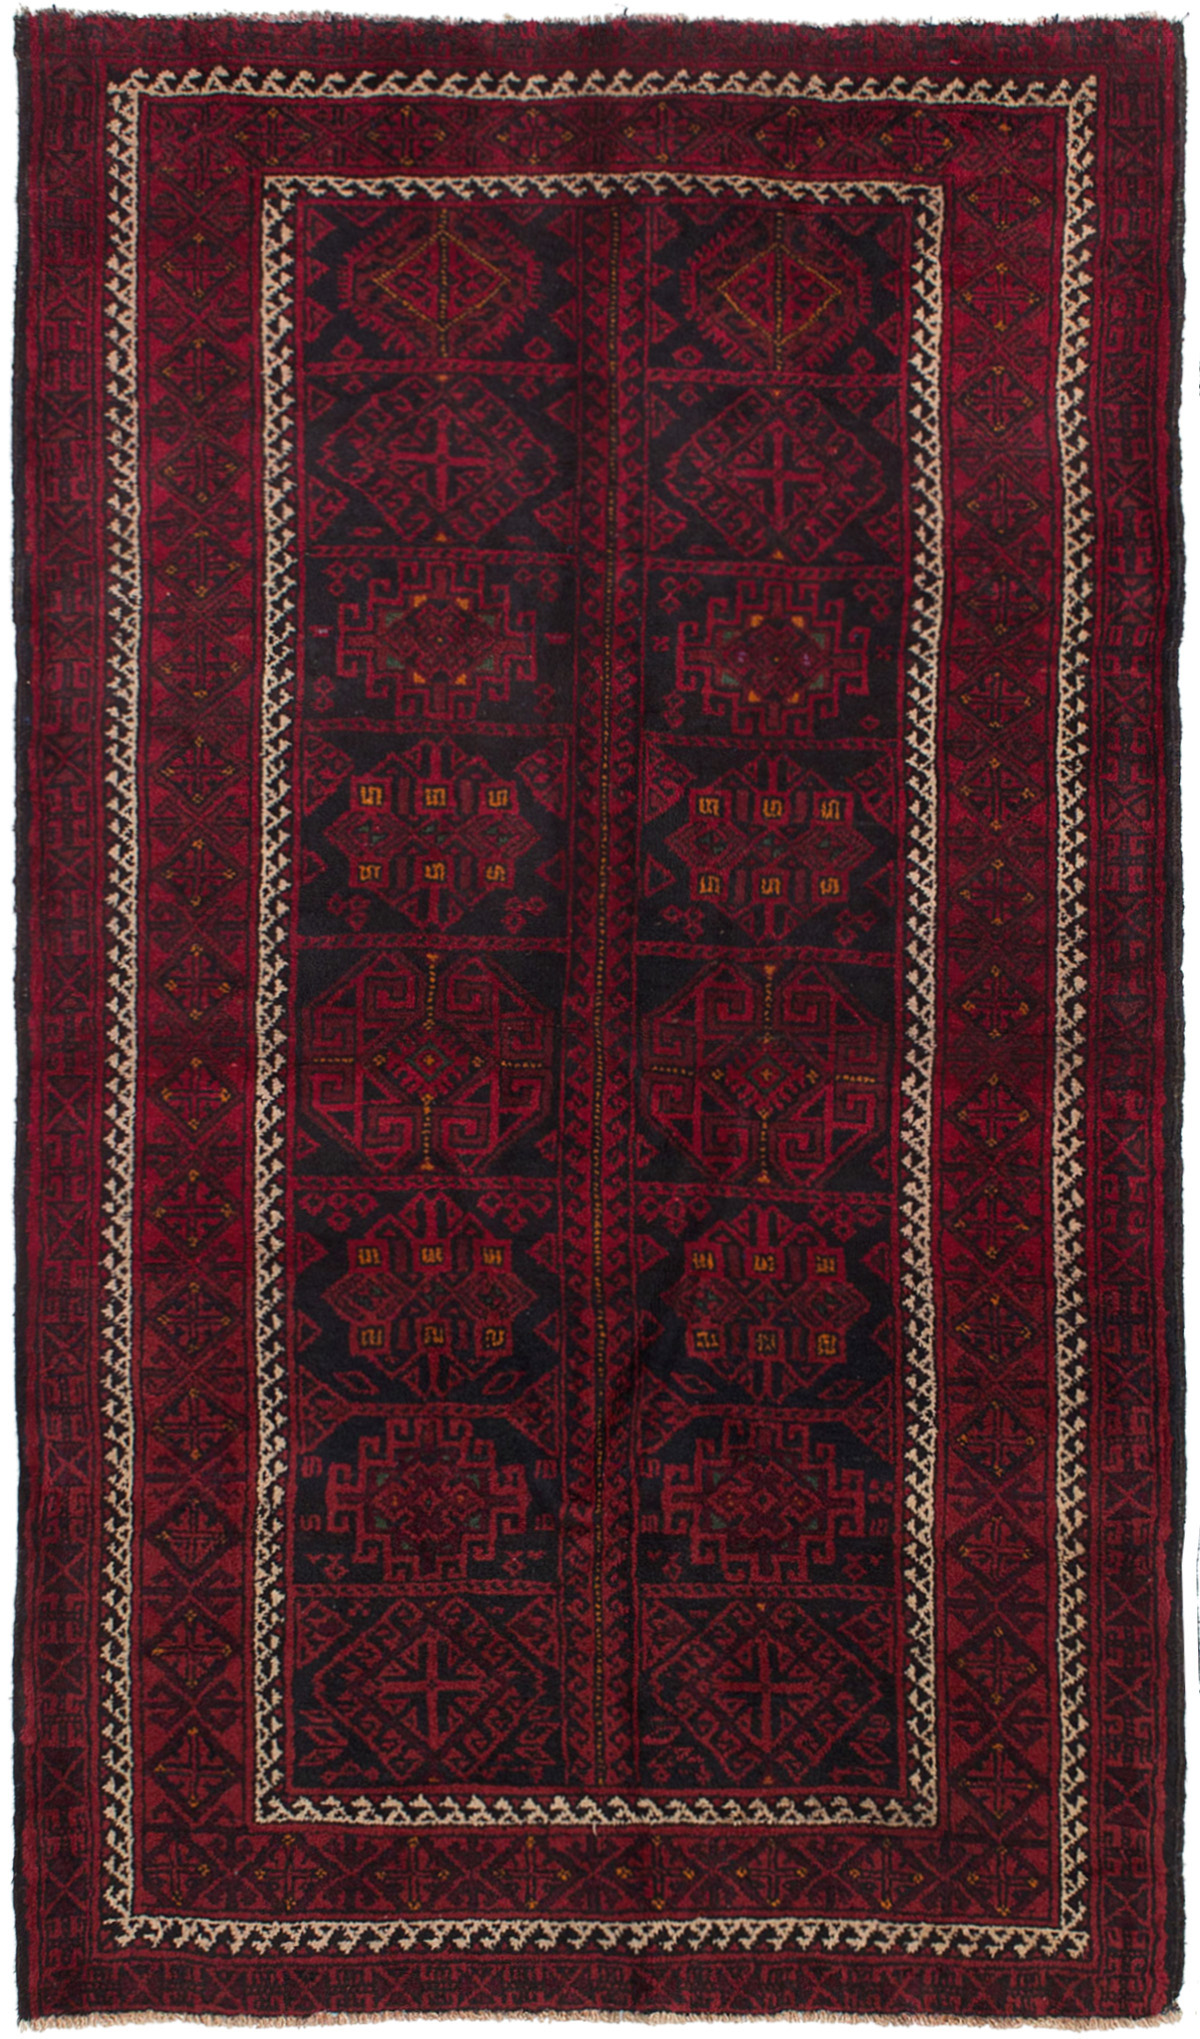 Hand-knotted Teimani Dark Red Wool Rug 3'10" x 6'7" Size: 3'10" x 6'7"  